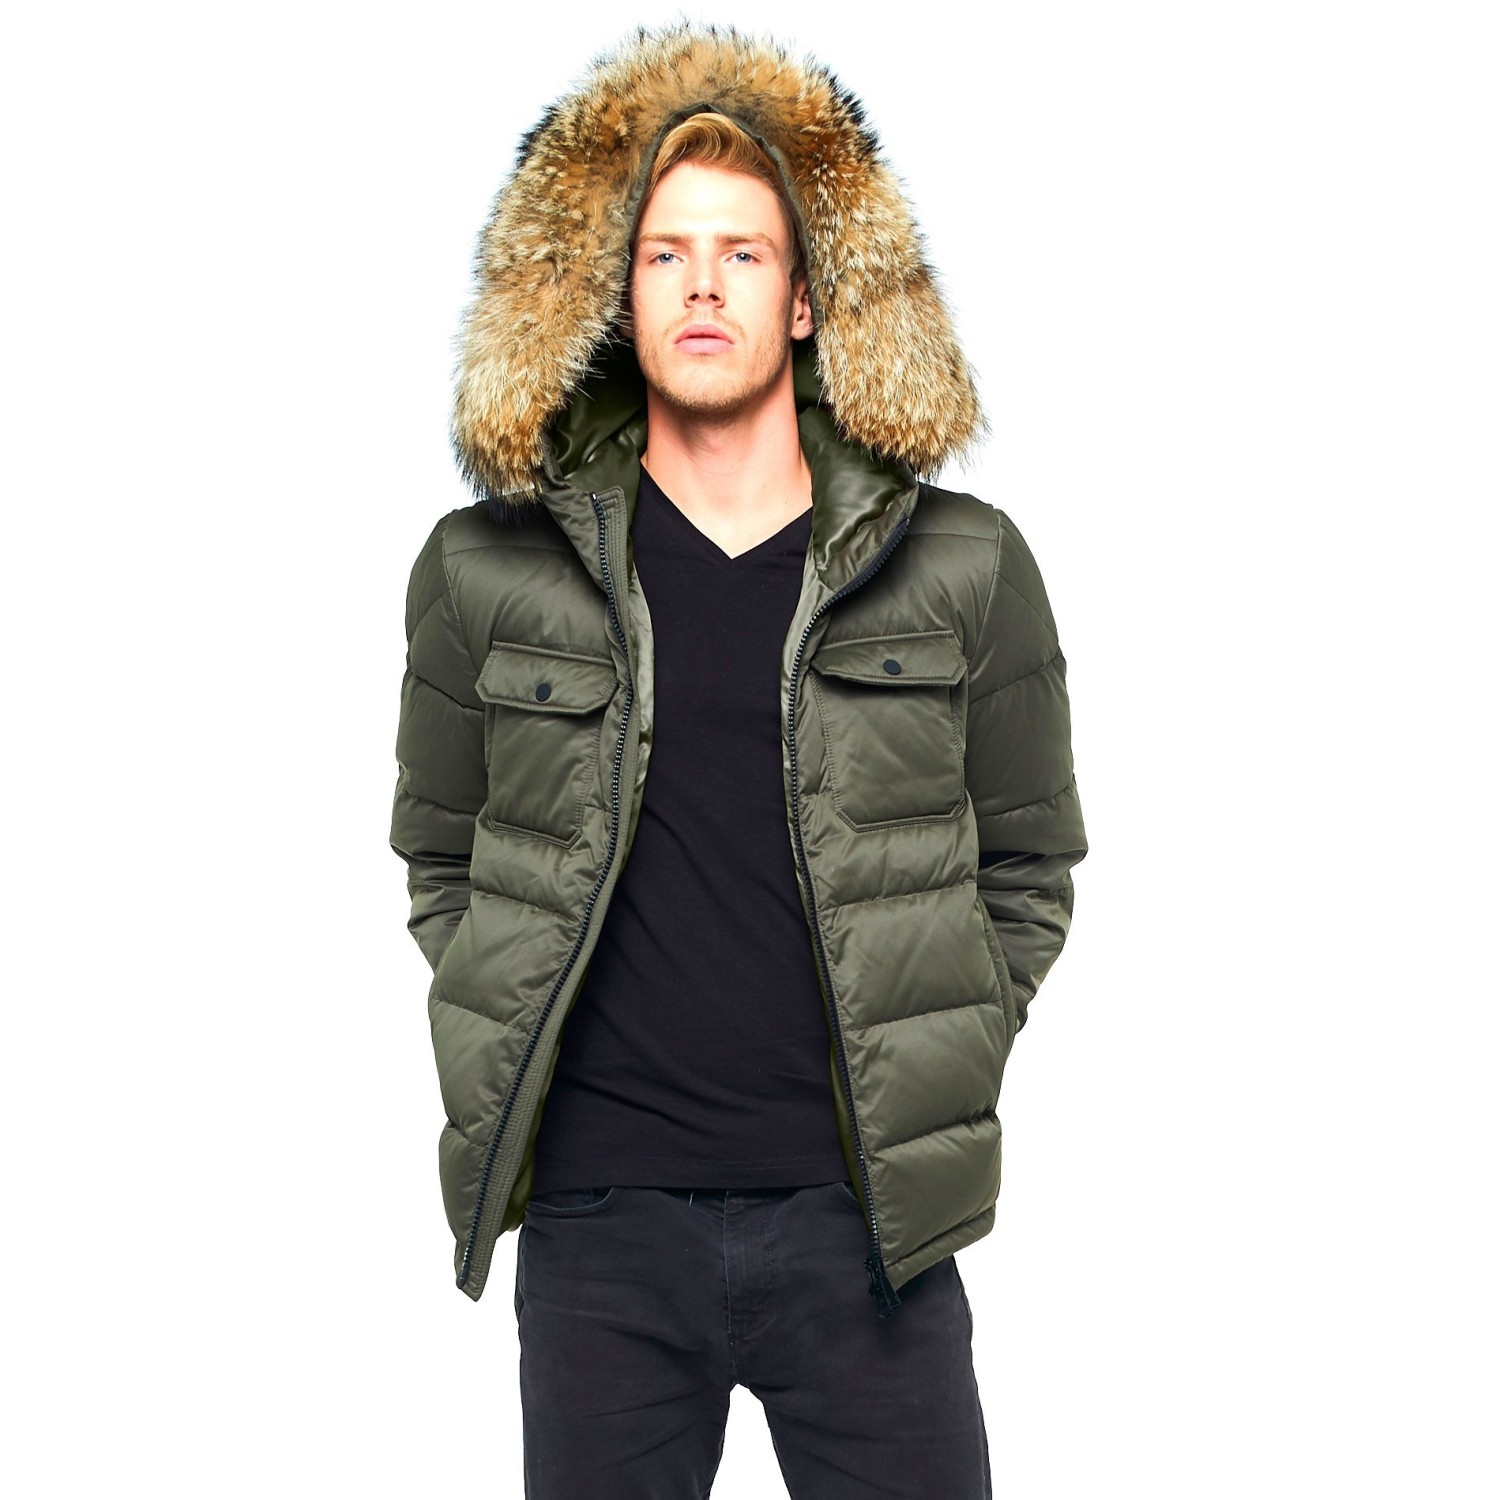 Pivaconis Mens Faux Fur Lined Faux Fur Hooded Winter Warm Down Quilted Coat Jacket Outwear 